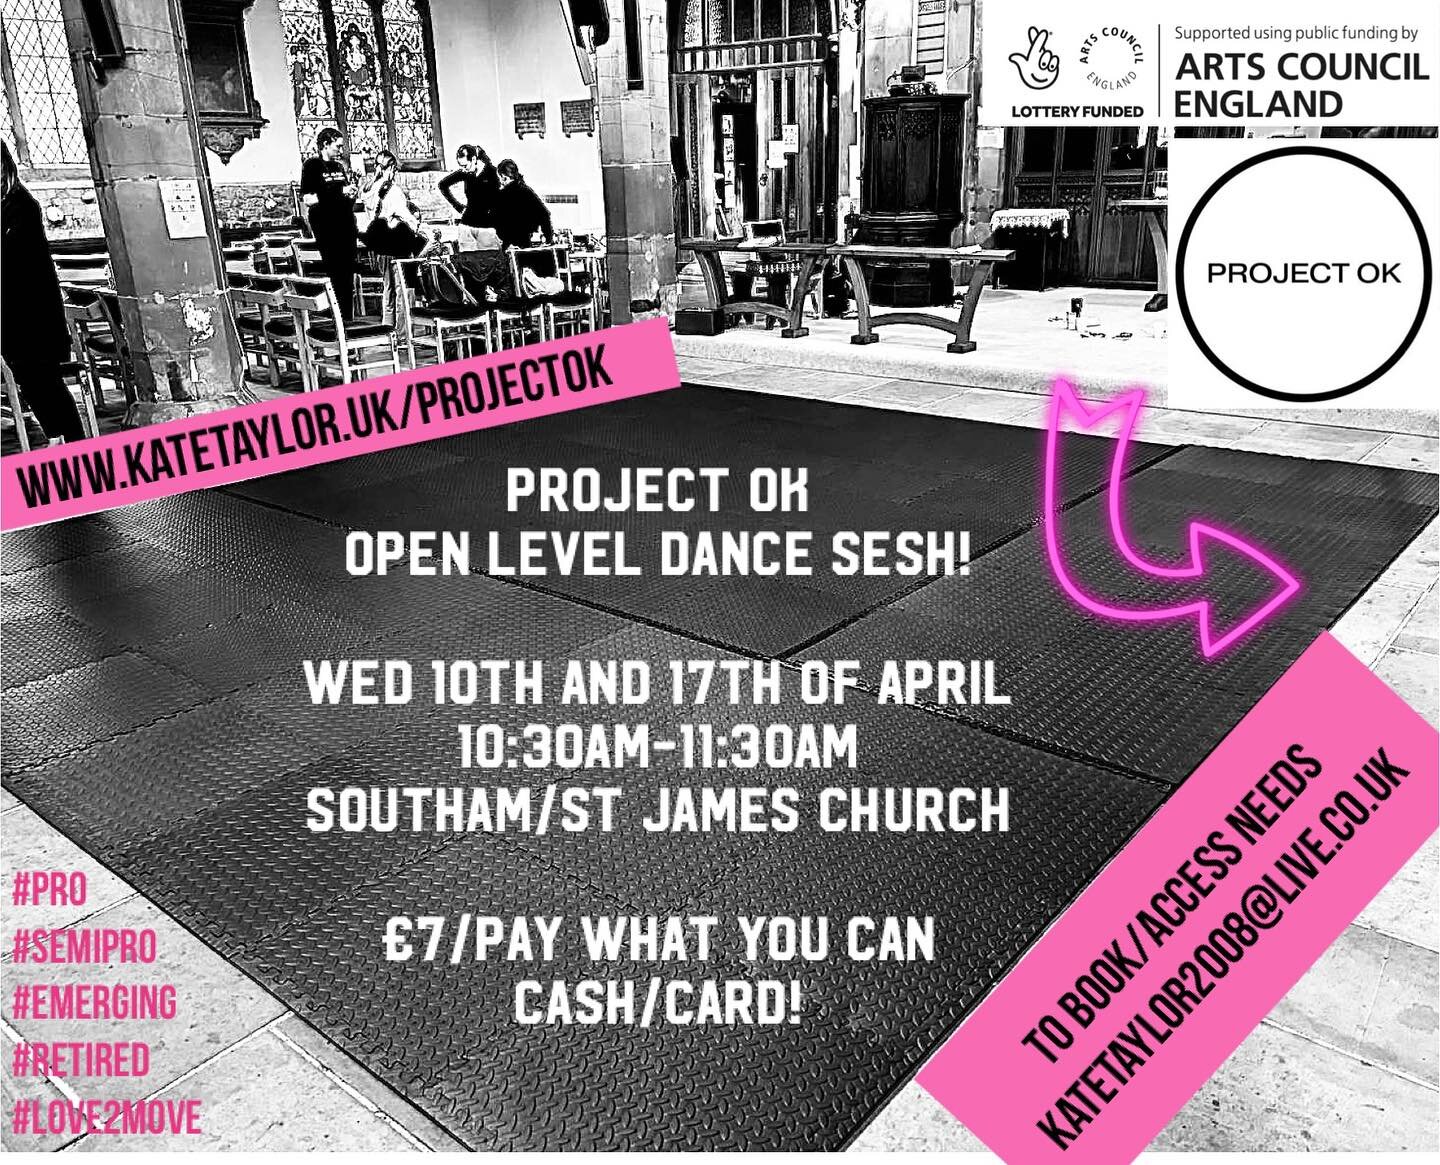 During Project OK we want to spread the love and reach movement practitioners/dance artists/physical beings/movers &amp; shakers, what ever your pace!

Open level class in beautiful rural Southam/Warwickshire. Come and see our fab pop up creative spa